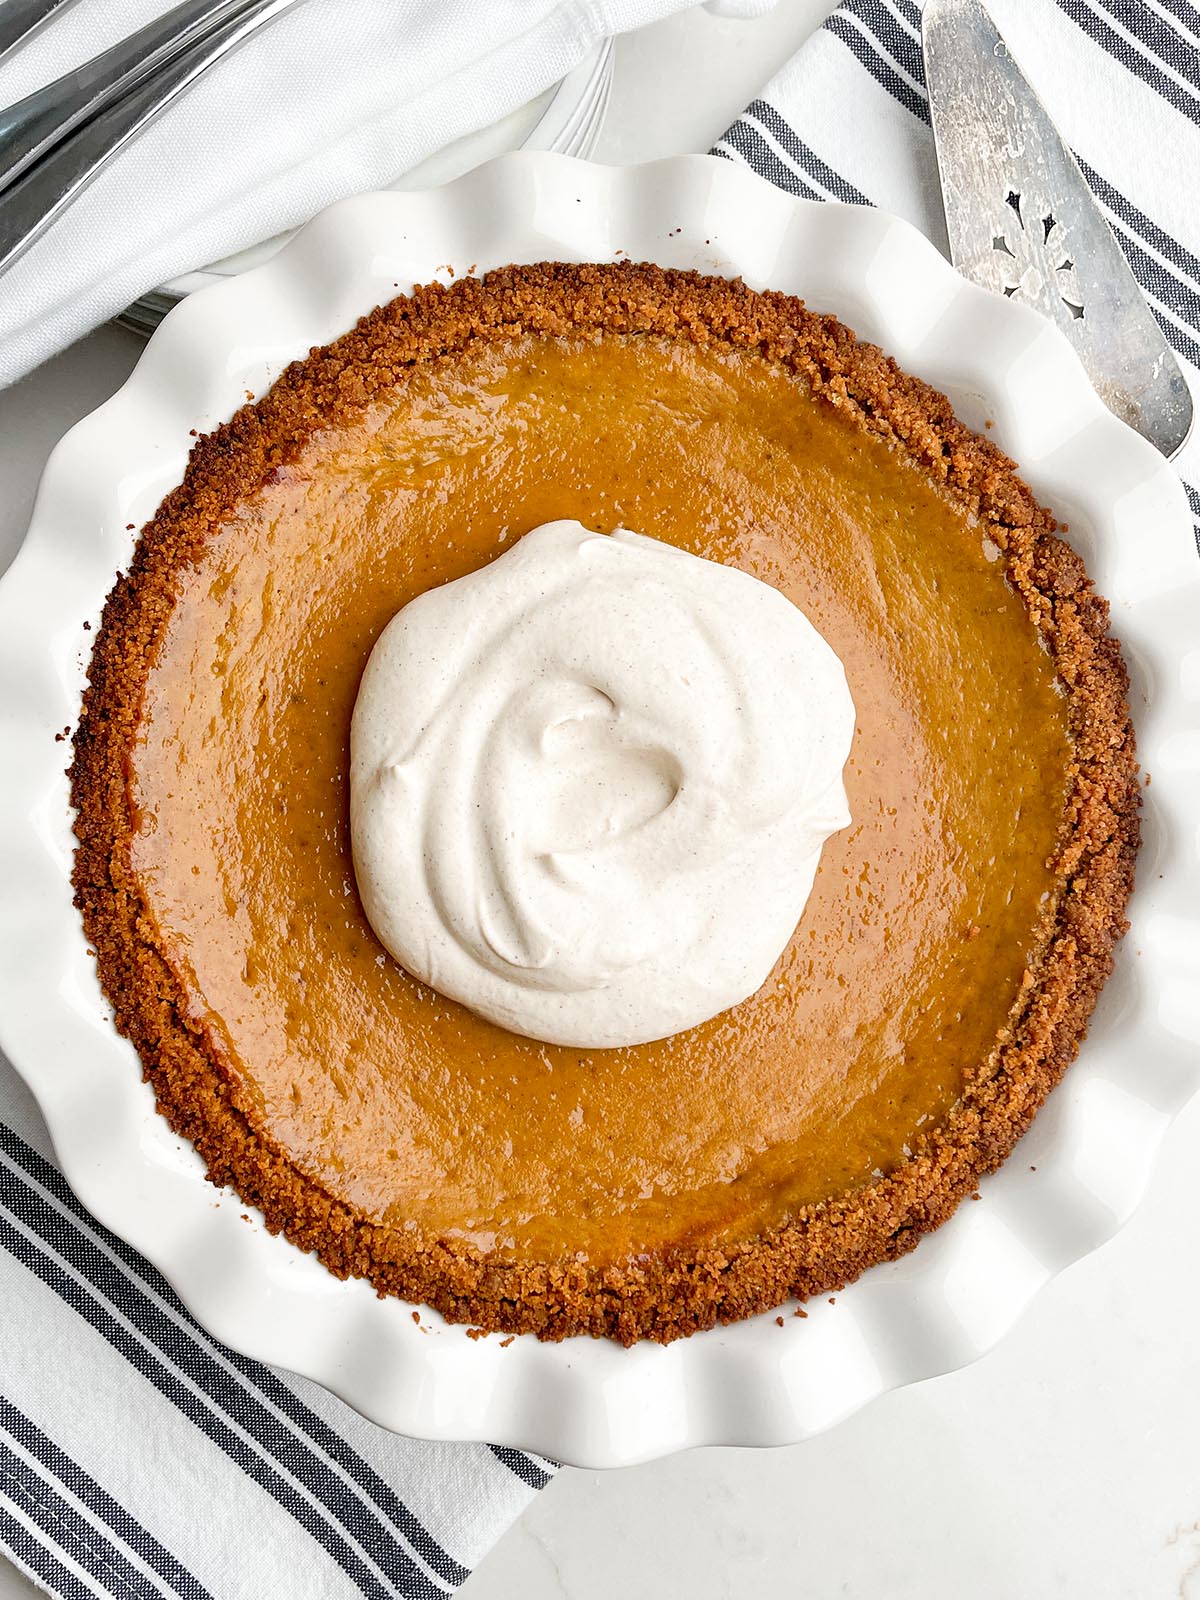 pumpkin pie with graham cracker crust in white pie plate with a dollop of cinnamon whipped cream in the center.